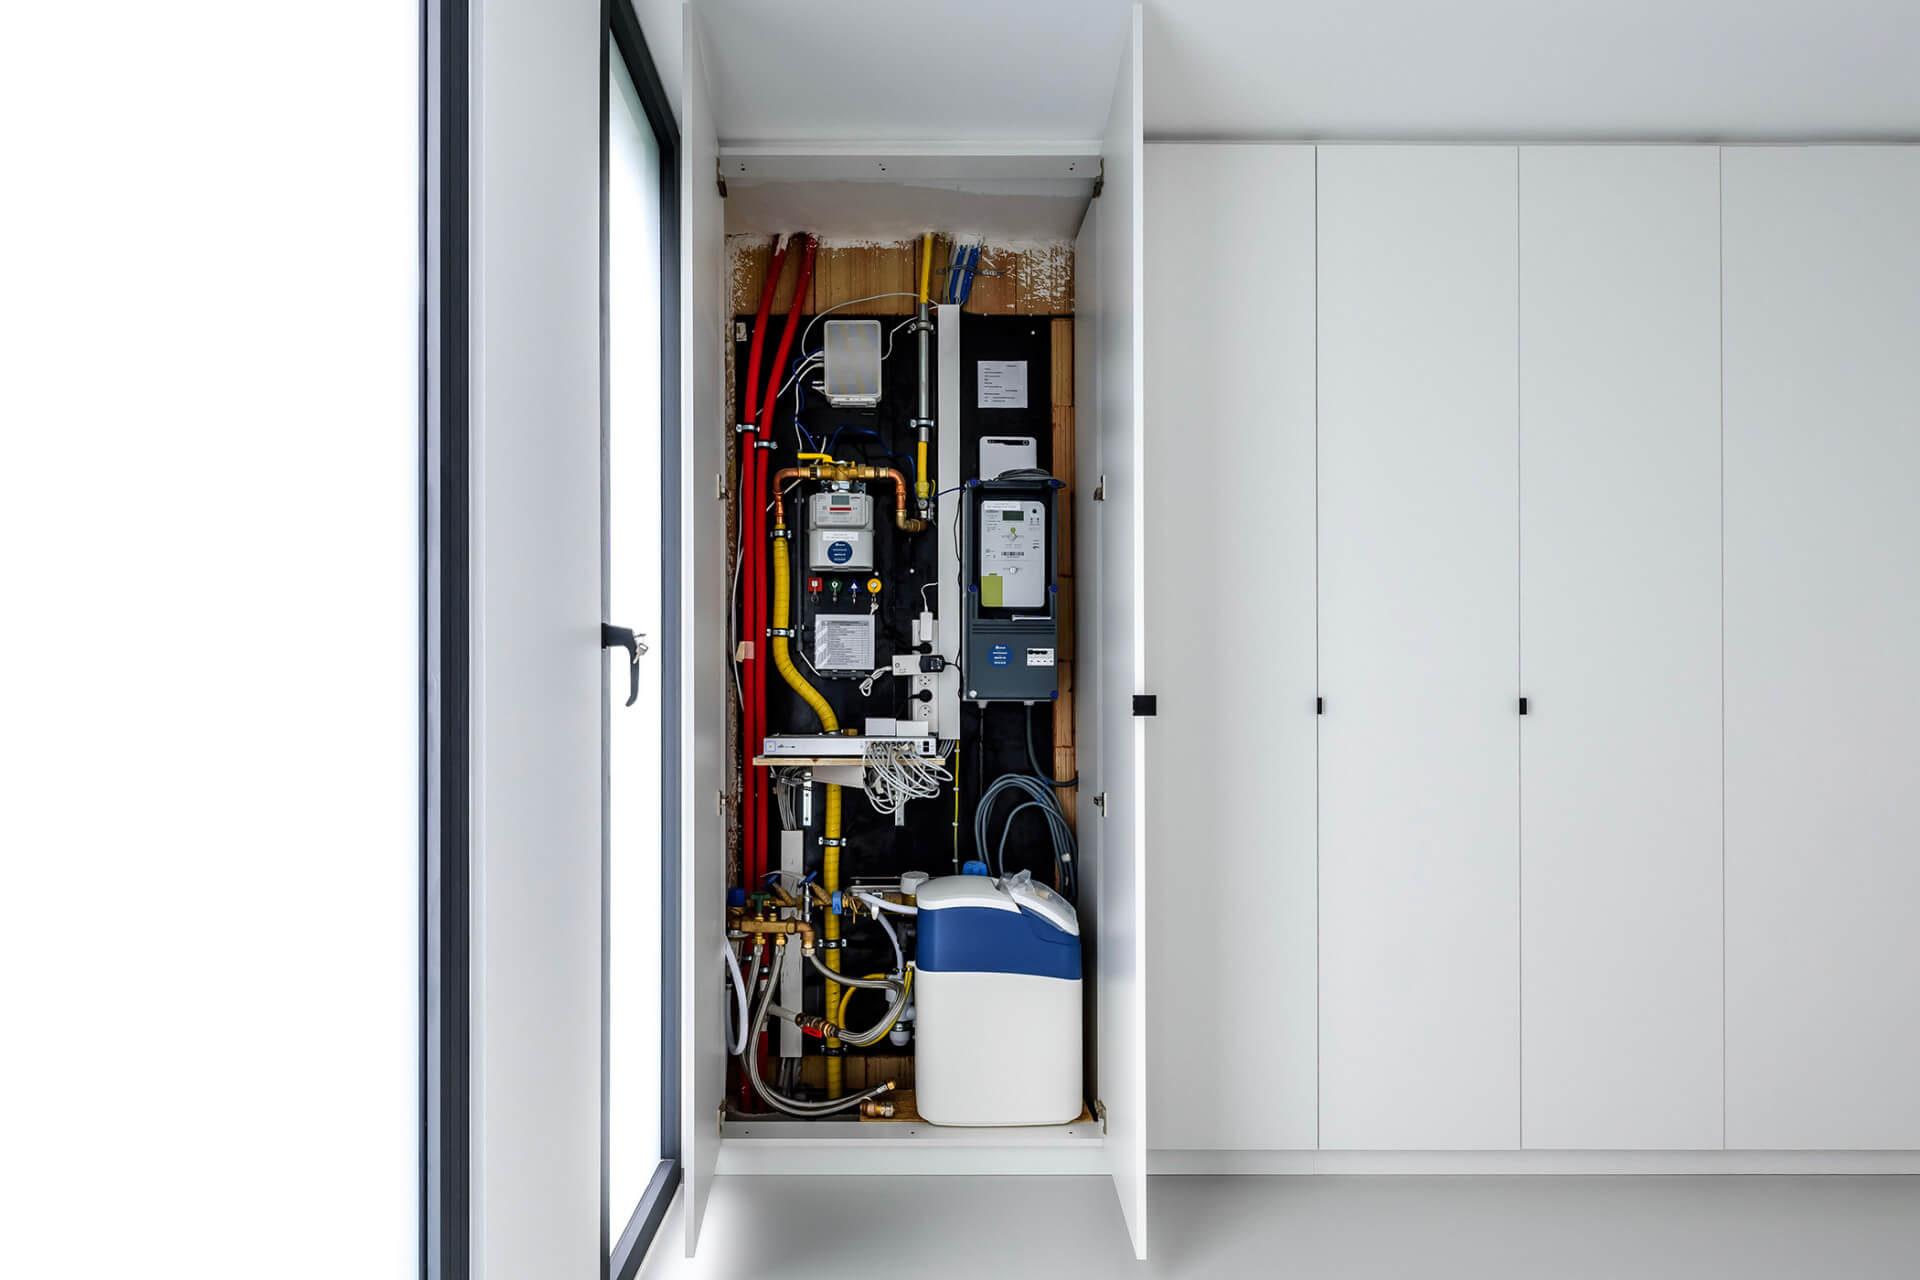 Hide unsightly pipes and wires with a bespoke technical cabinet